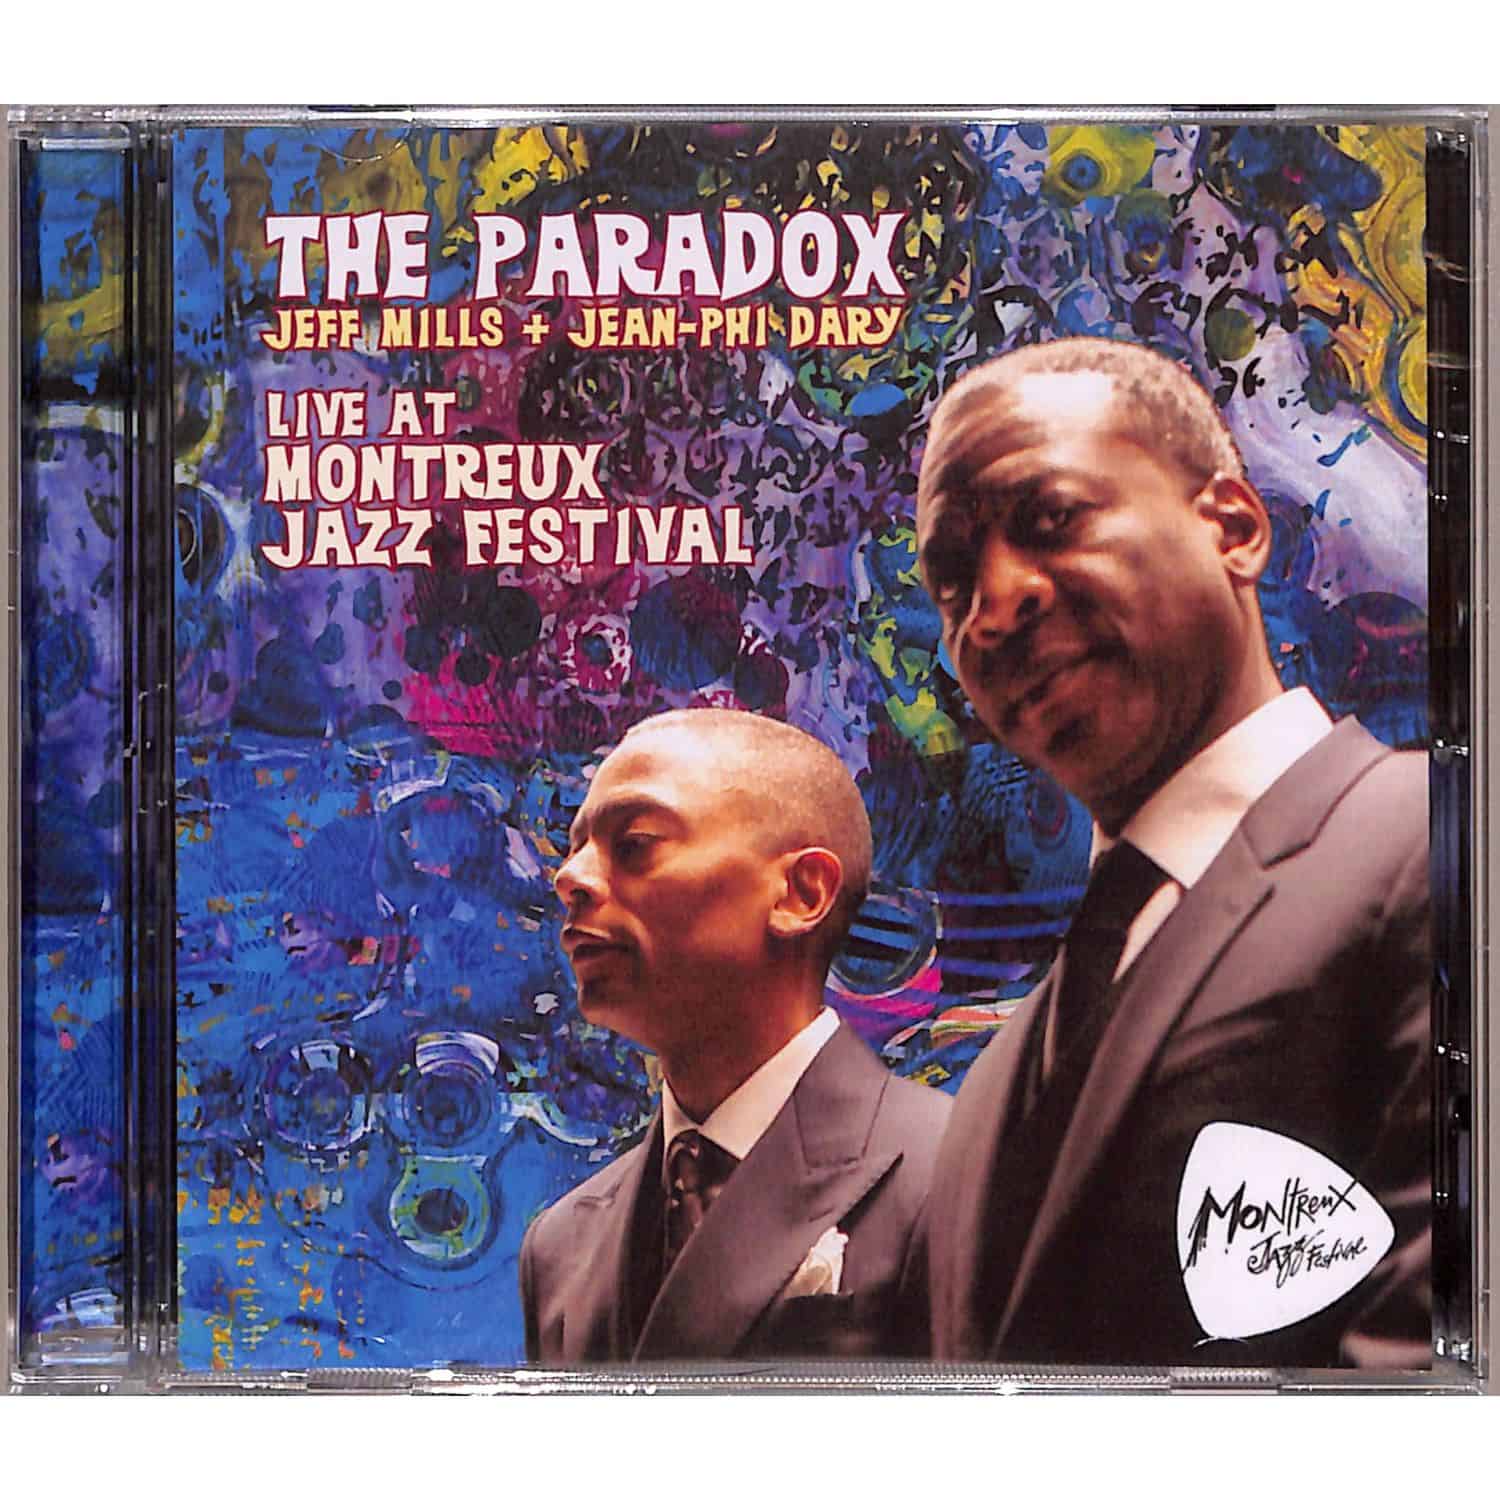 The Paradox  - LIVE AT MONTREUX JAZZ FESTIVAL 